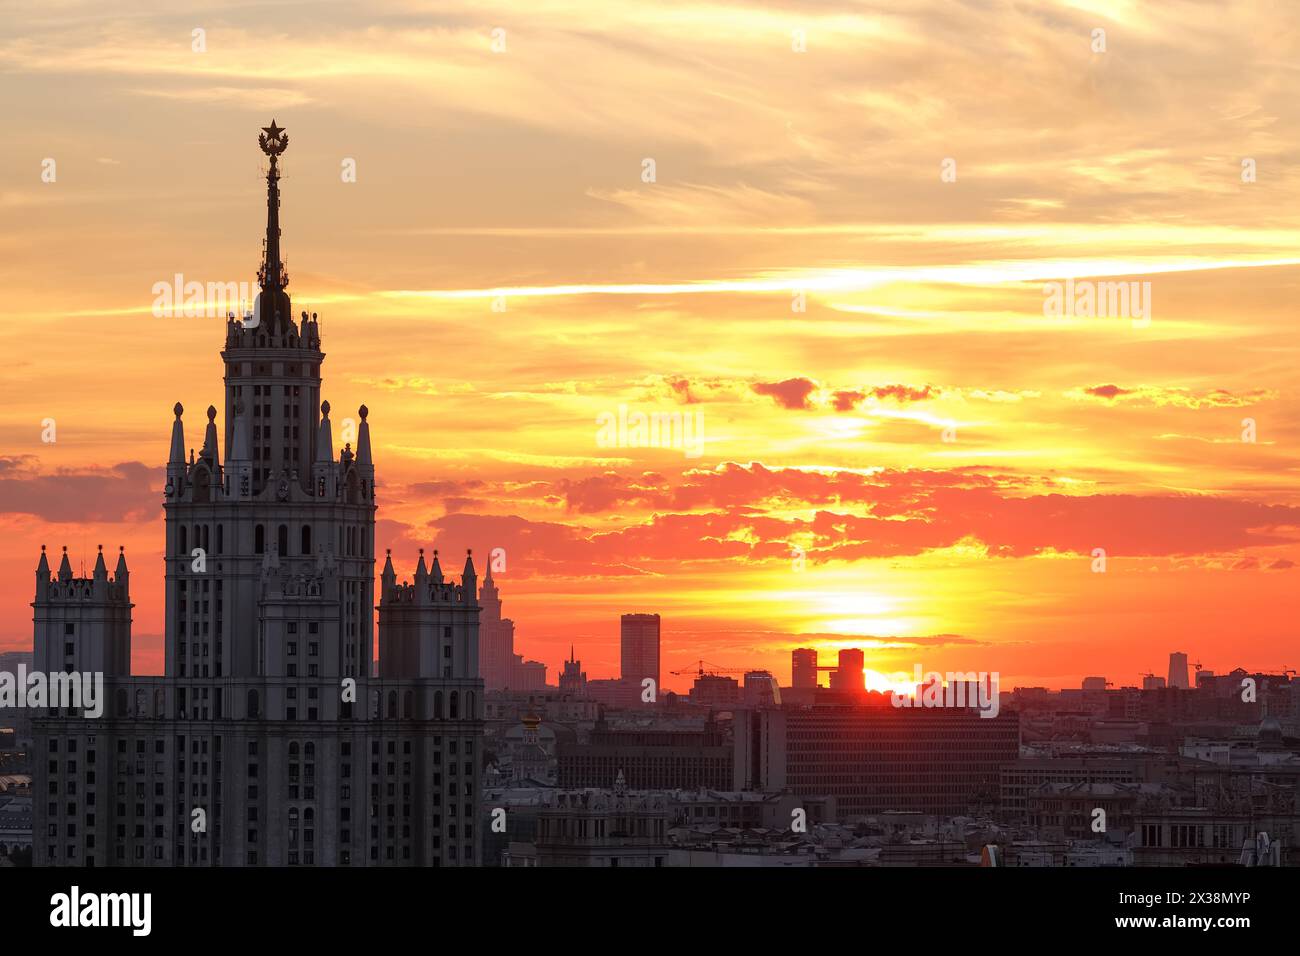 Stalin skyscraper and panorama of city during sunrise in Moscow, Russia Stock Photo